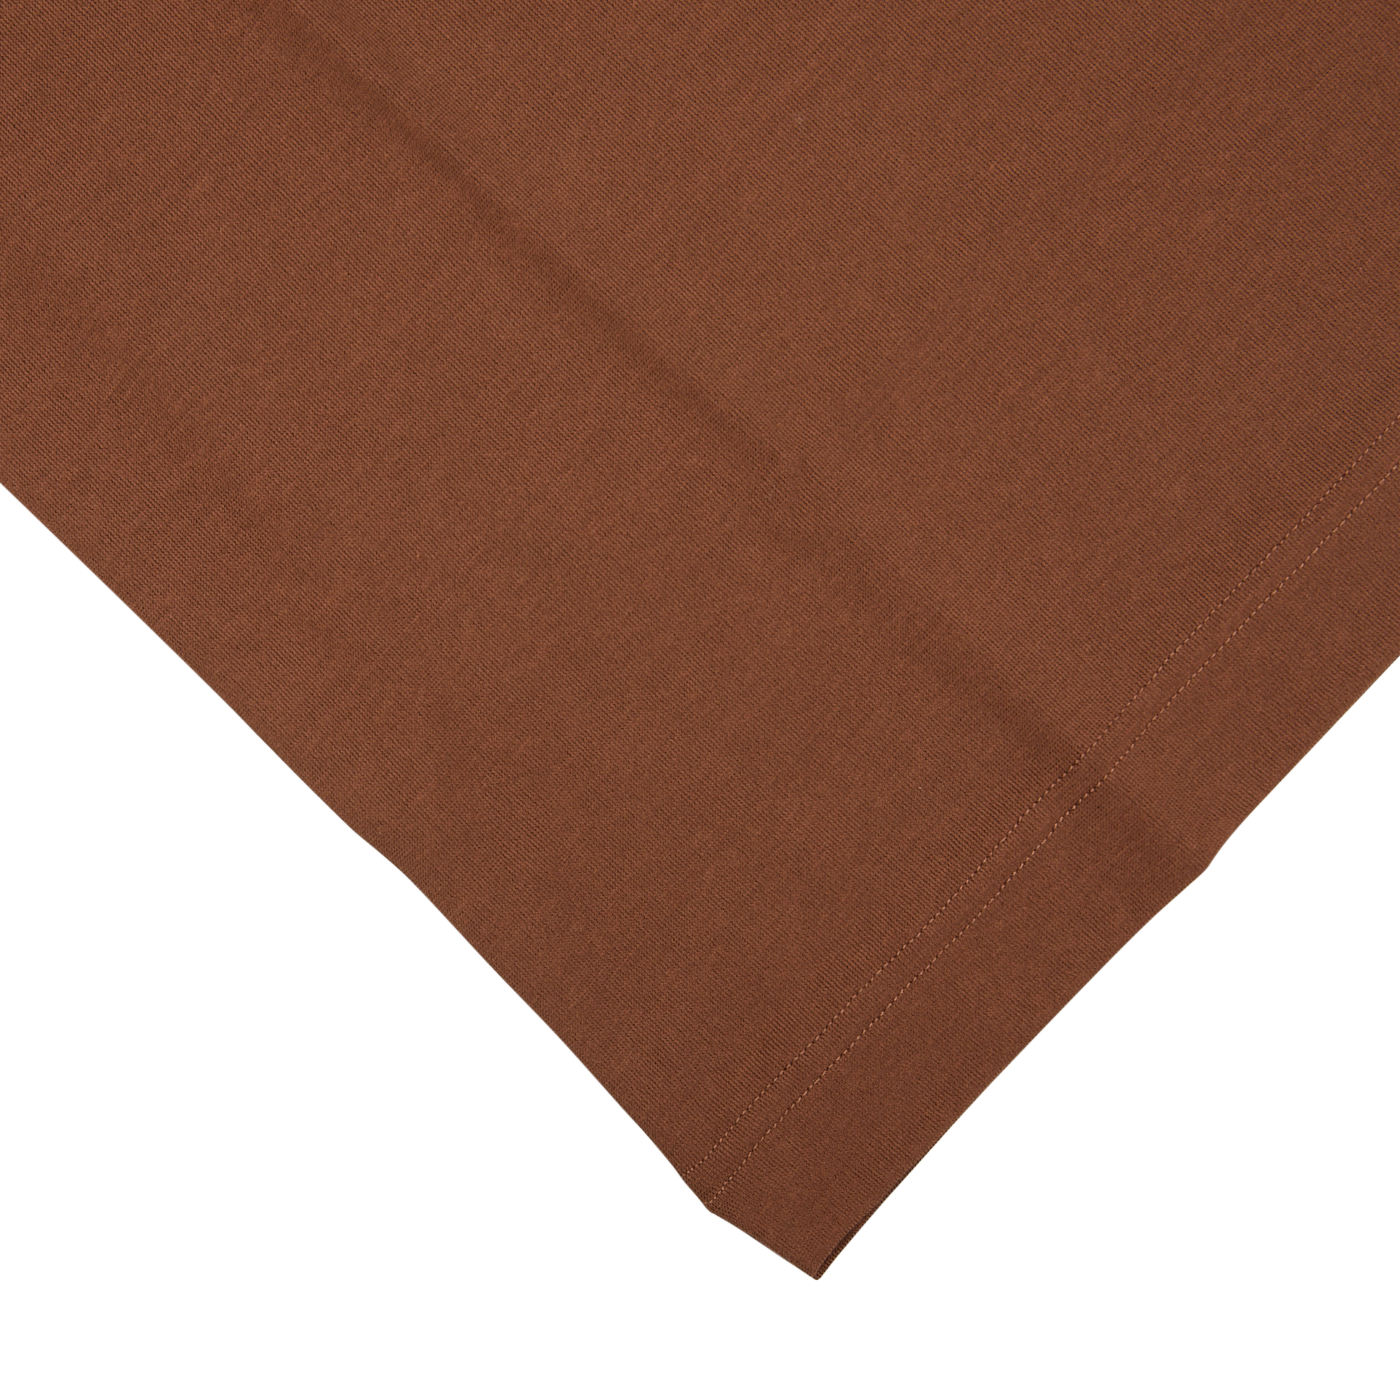 A coffee brown Zanone ice cotton LS polo shirt on a white surface.